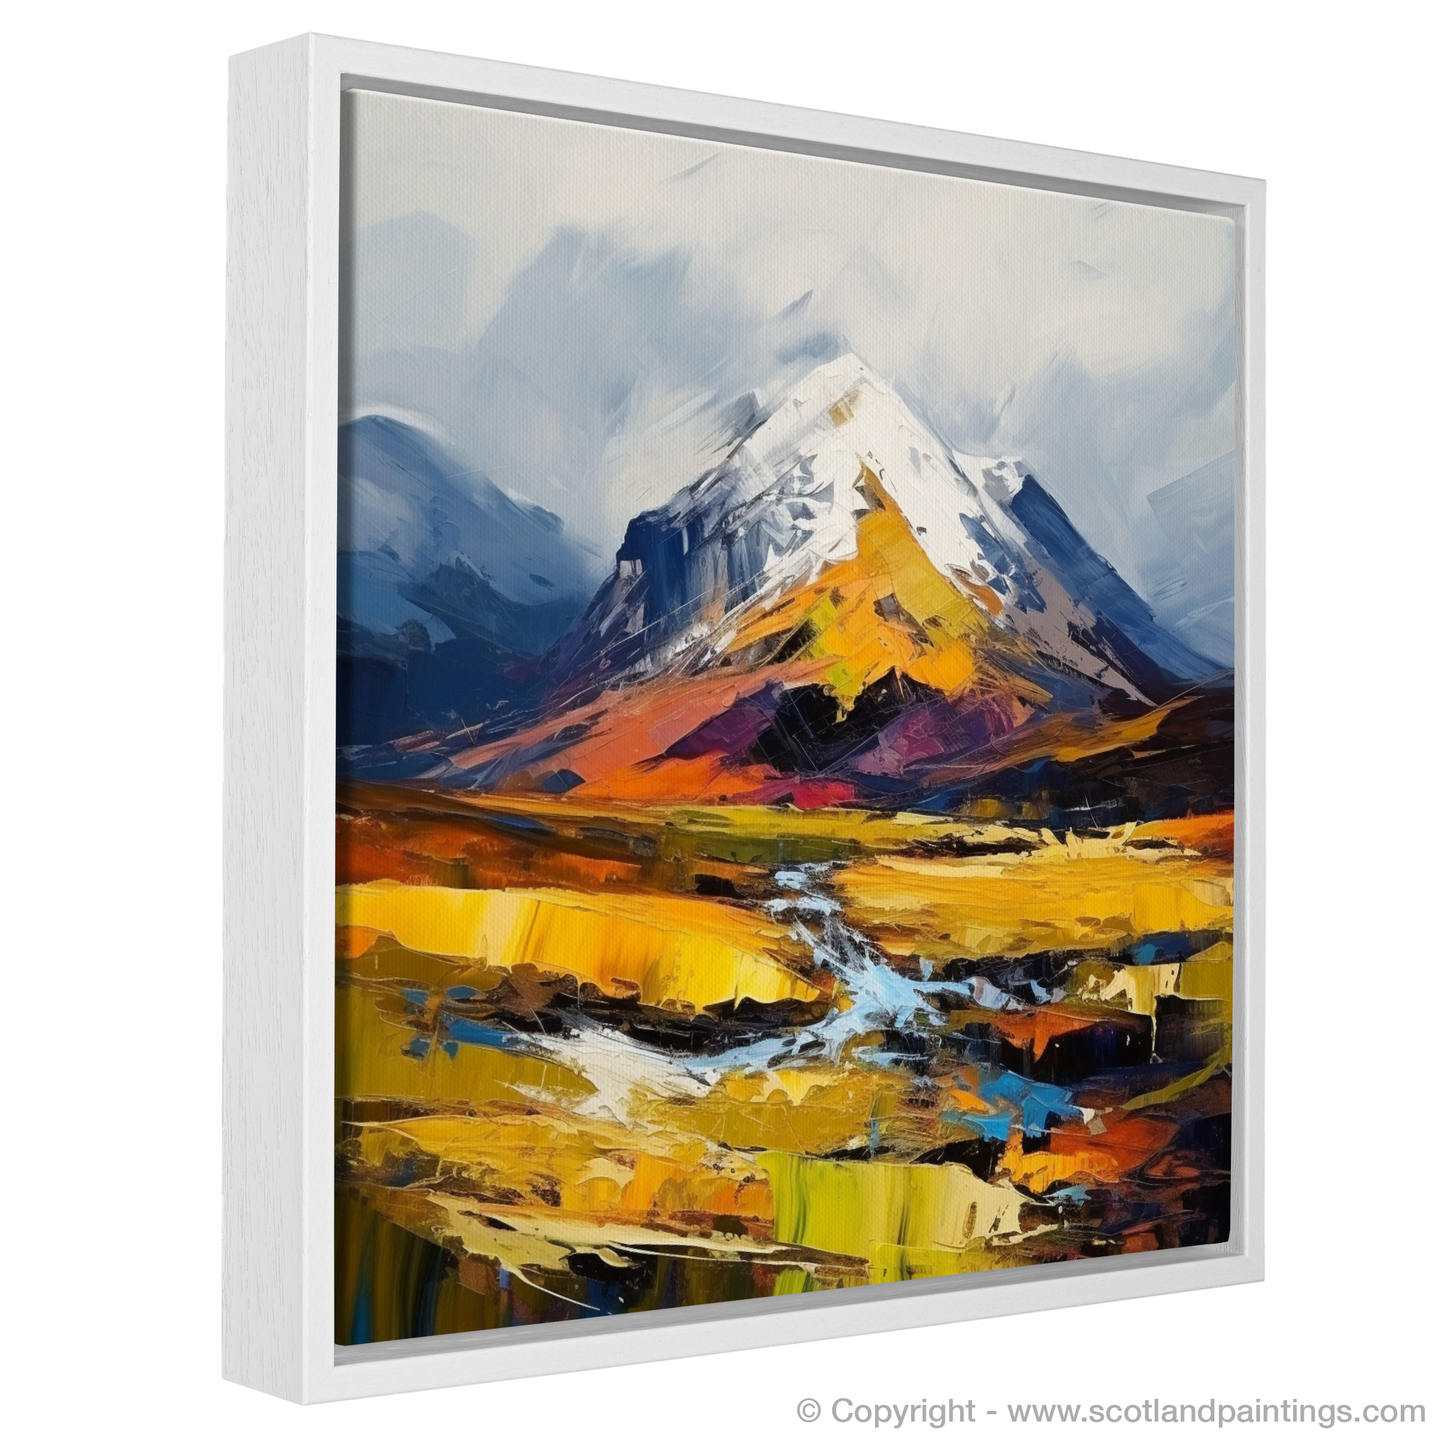 Painting and Art Print of Meall nan Tarmachan entitled "Highland Majesty: Meall nan Tarmachan Unleashed".